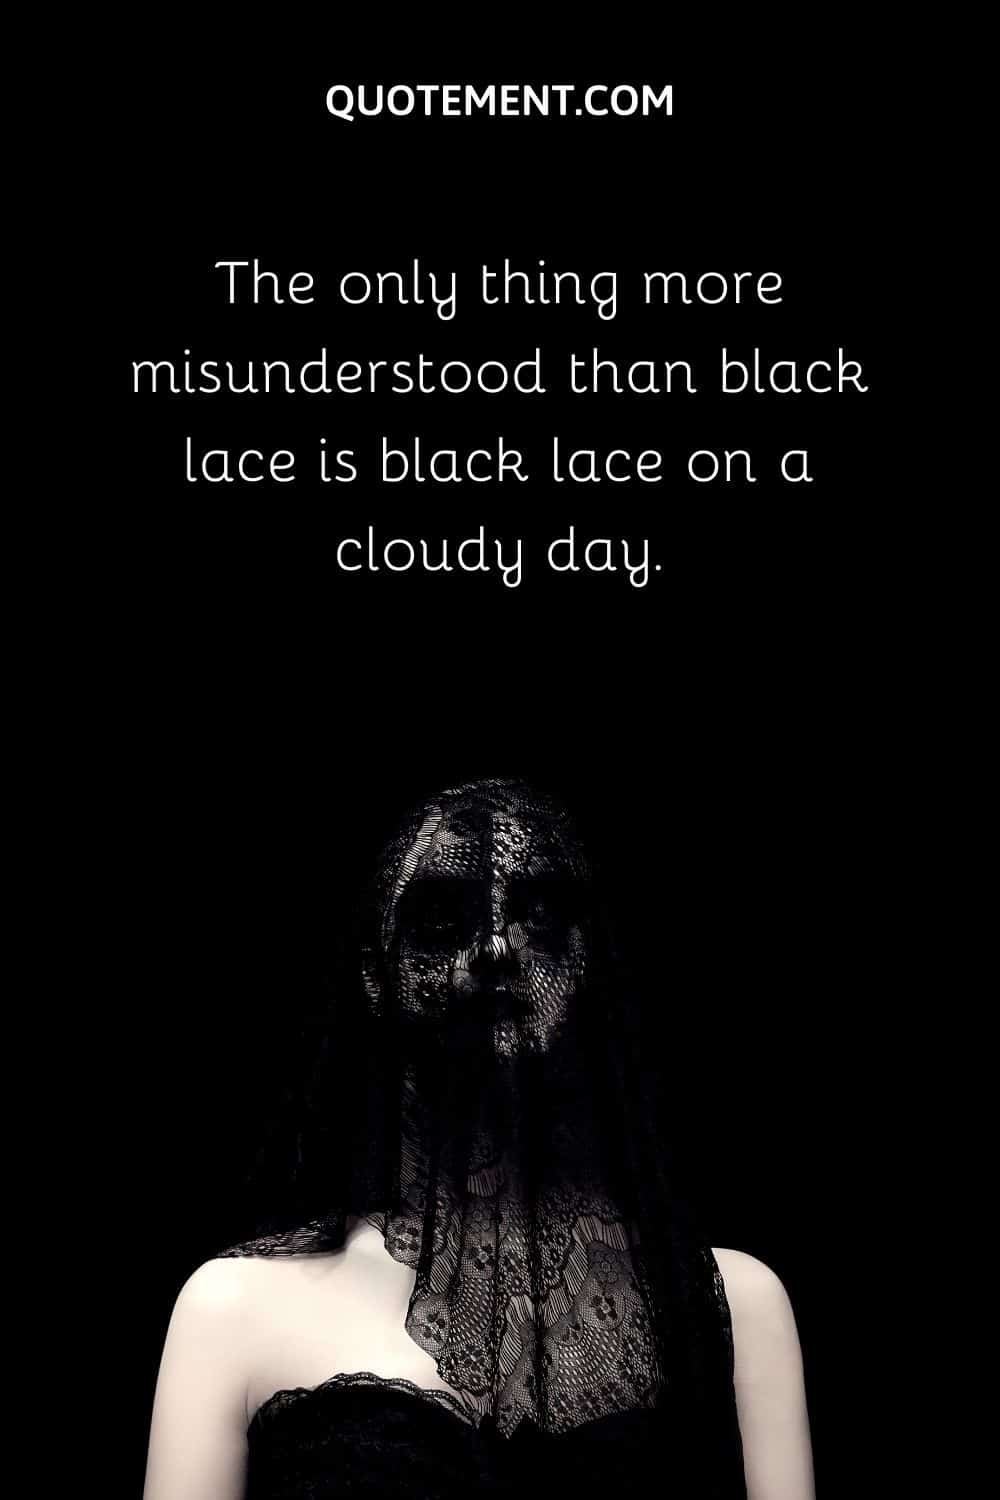 black lace on a cloudy day